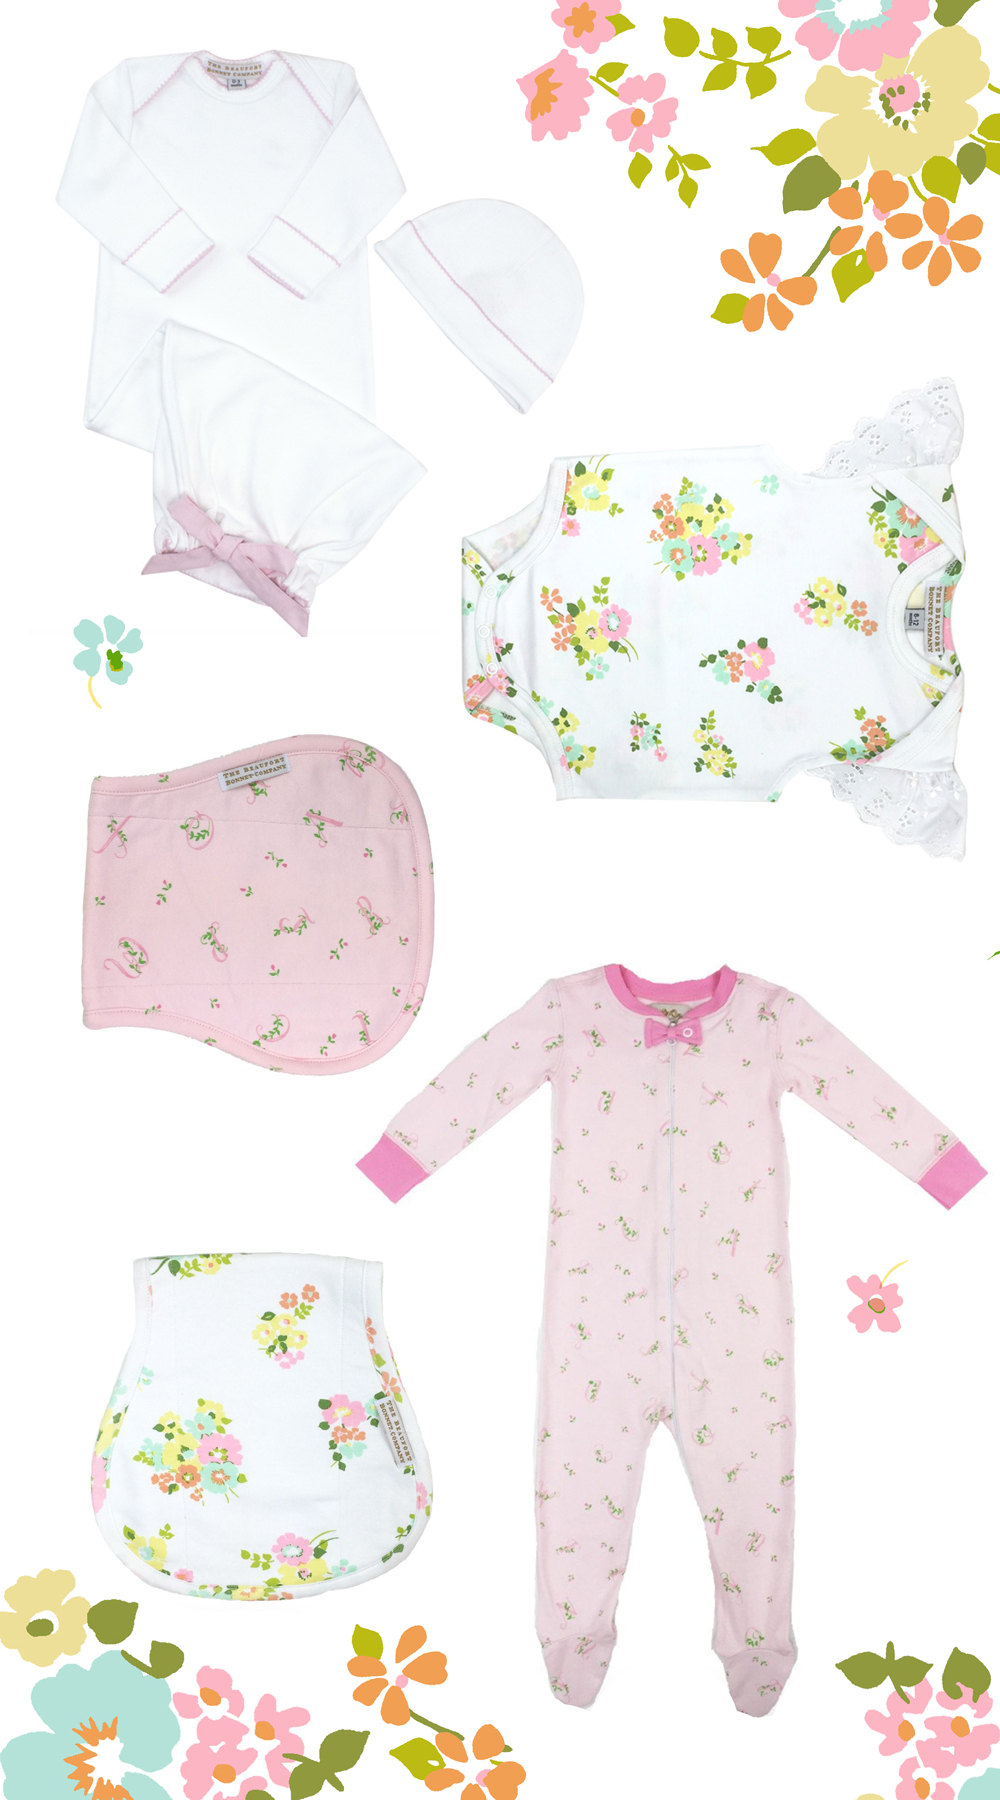 Sleepwear For Your Sweeties – The Well To Do Review